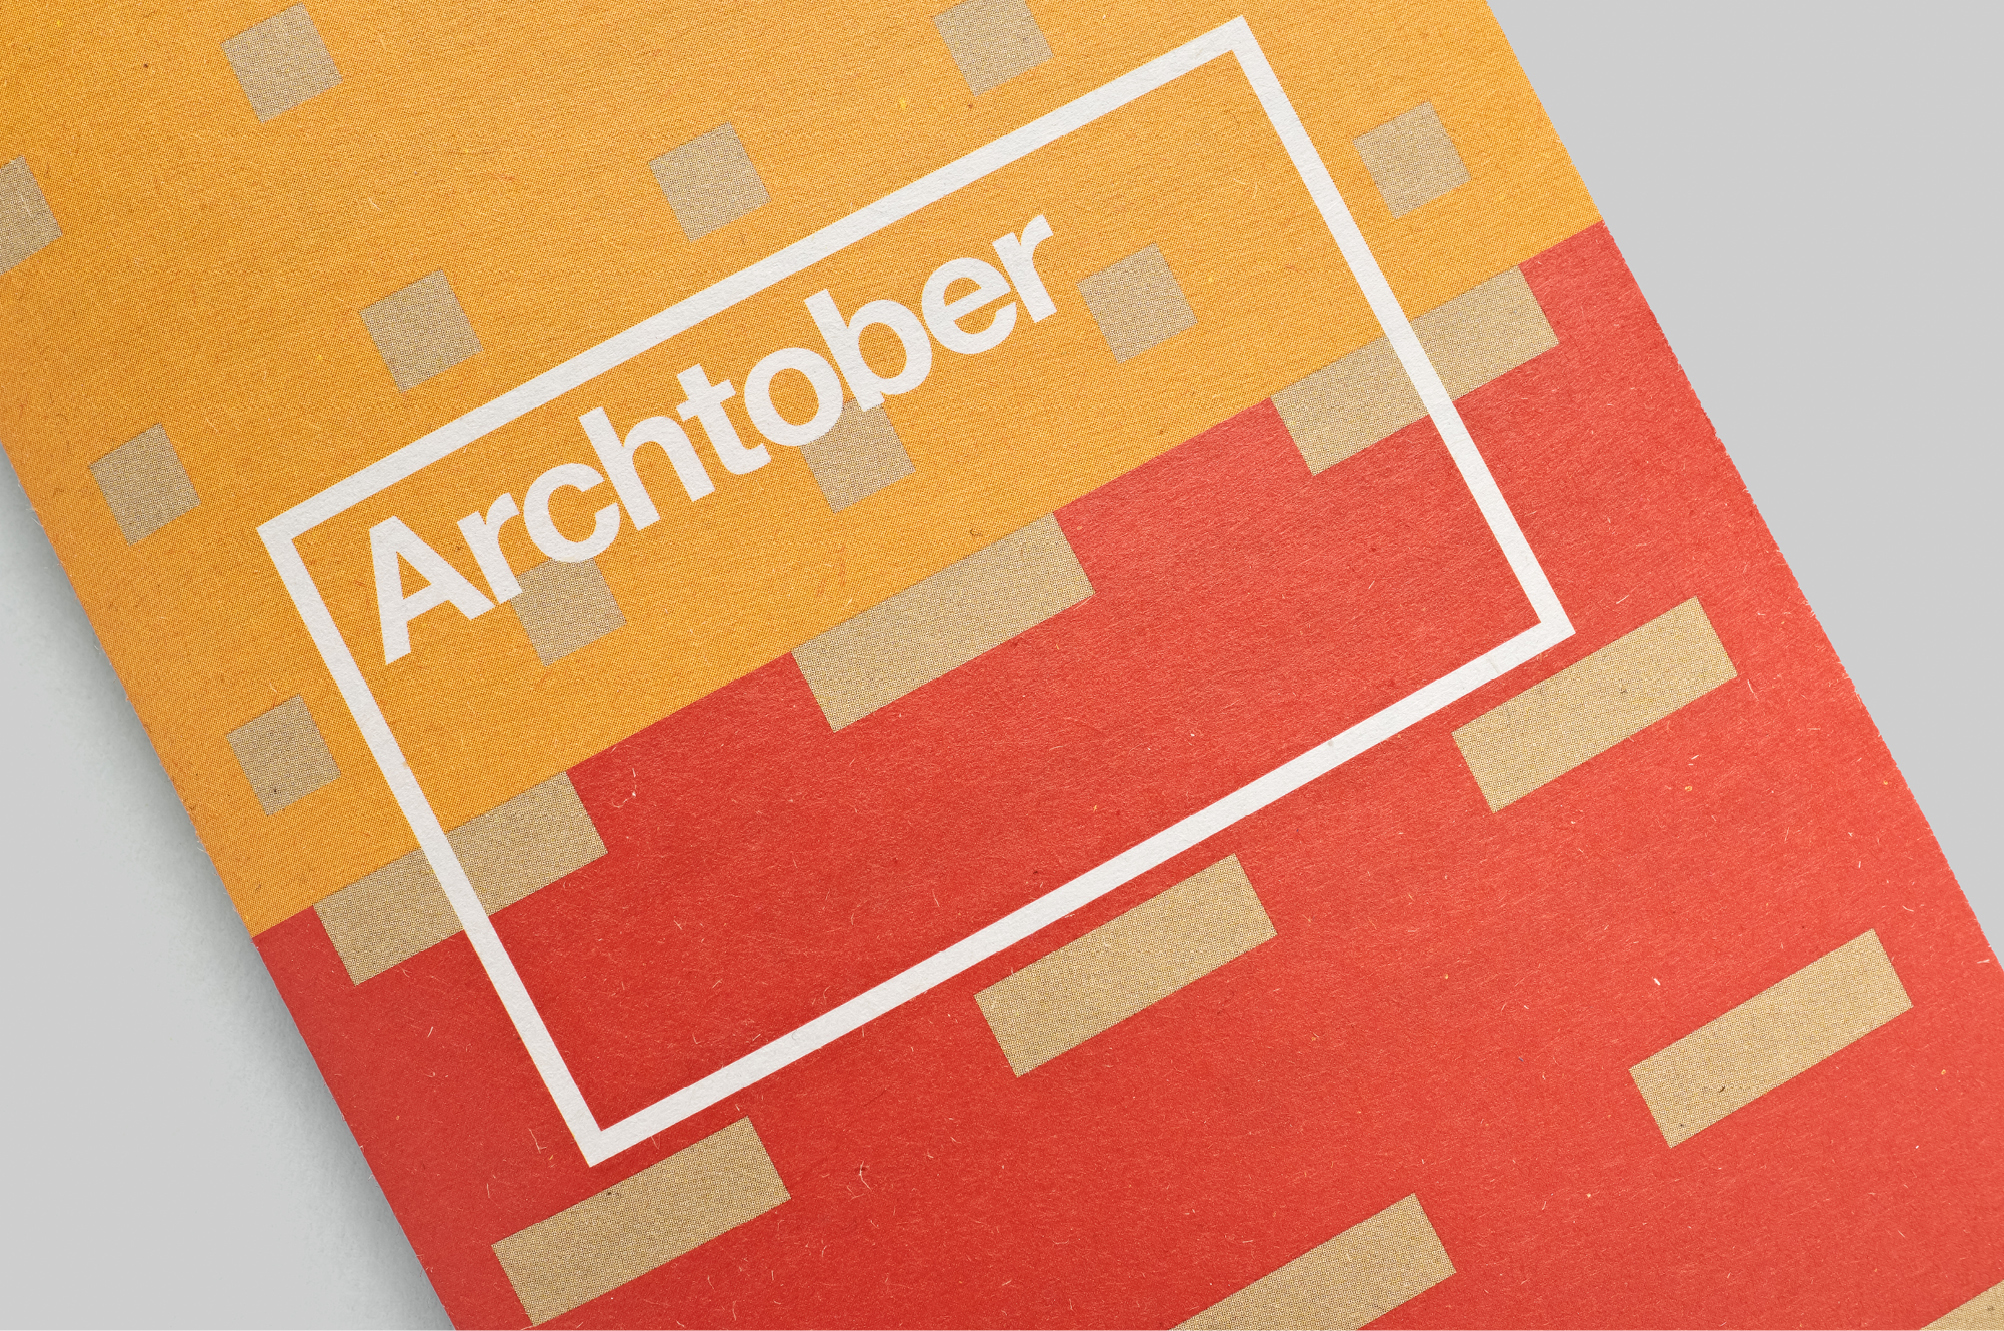 Archtober collateral - MTWTF